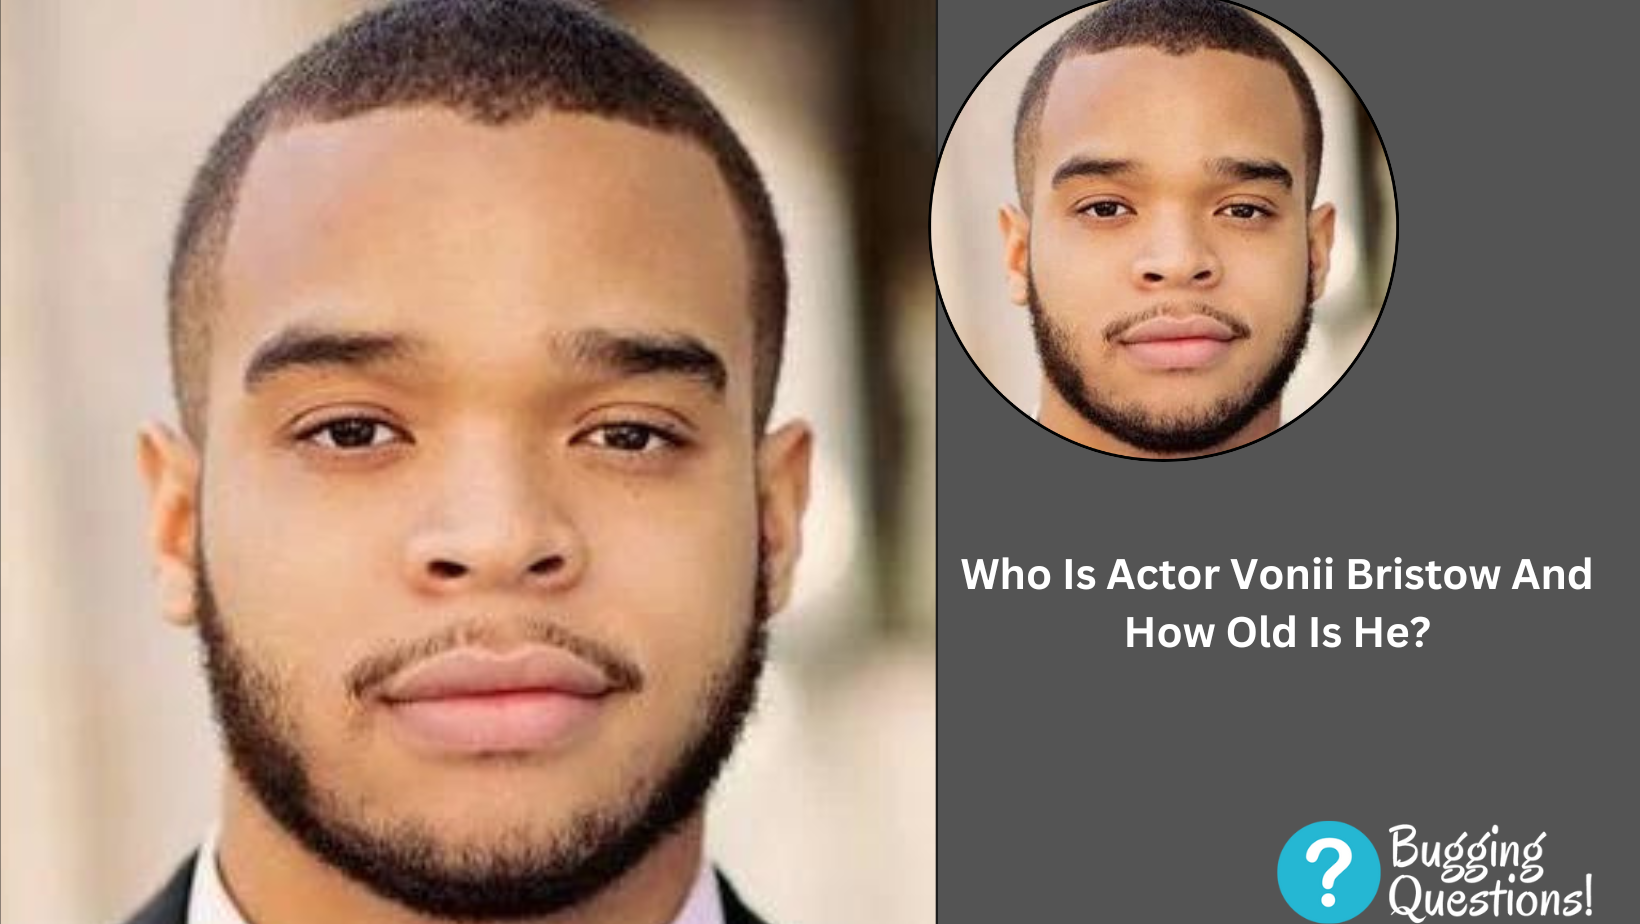 Who Is Actor Vonii Bristow And How Old Is He?